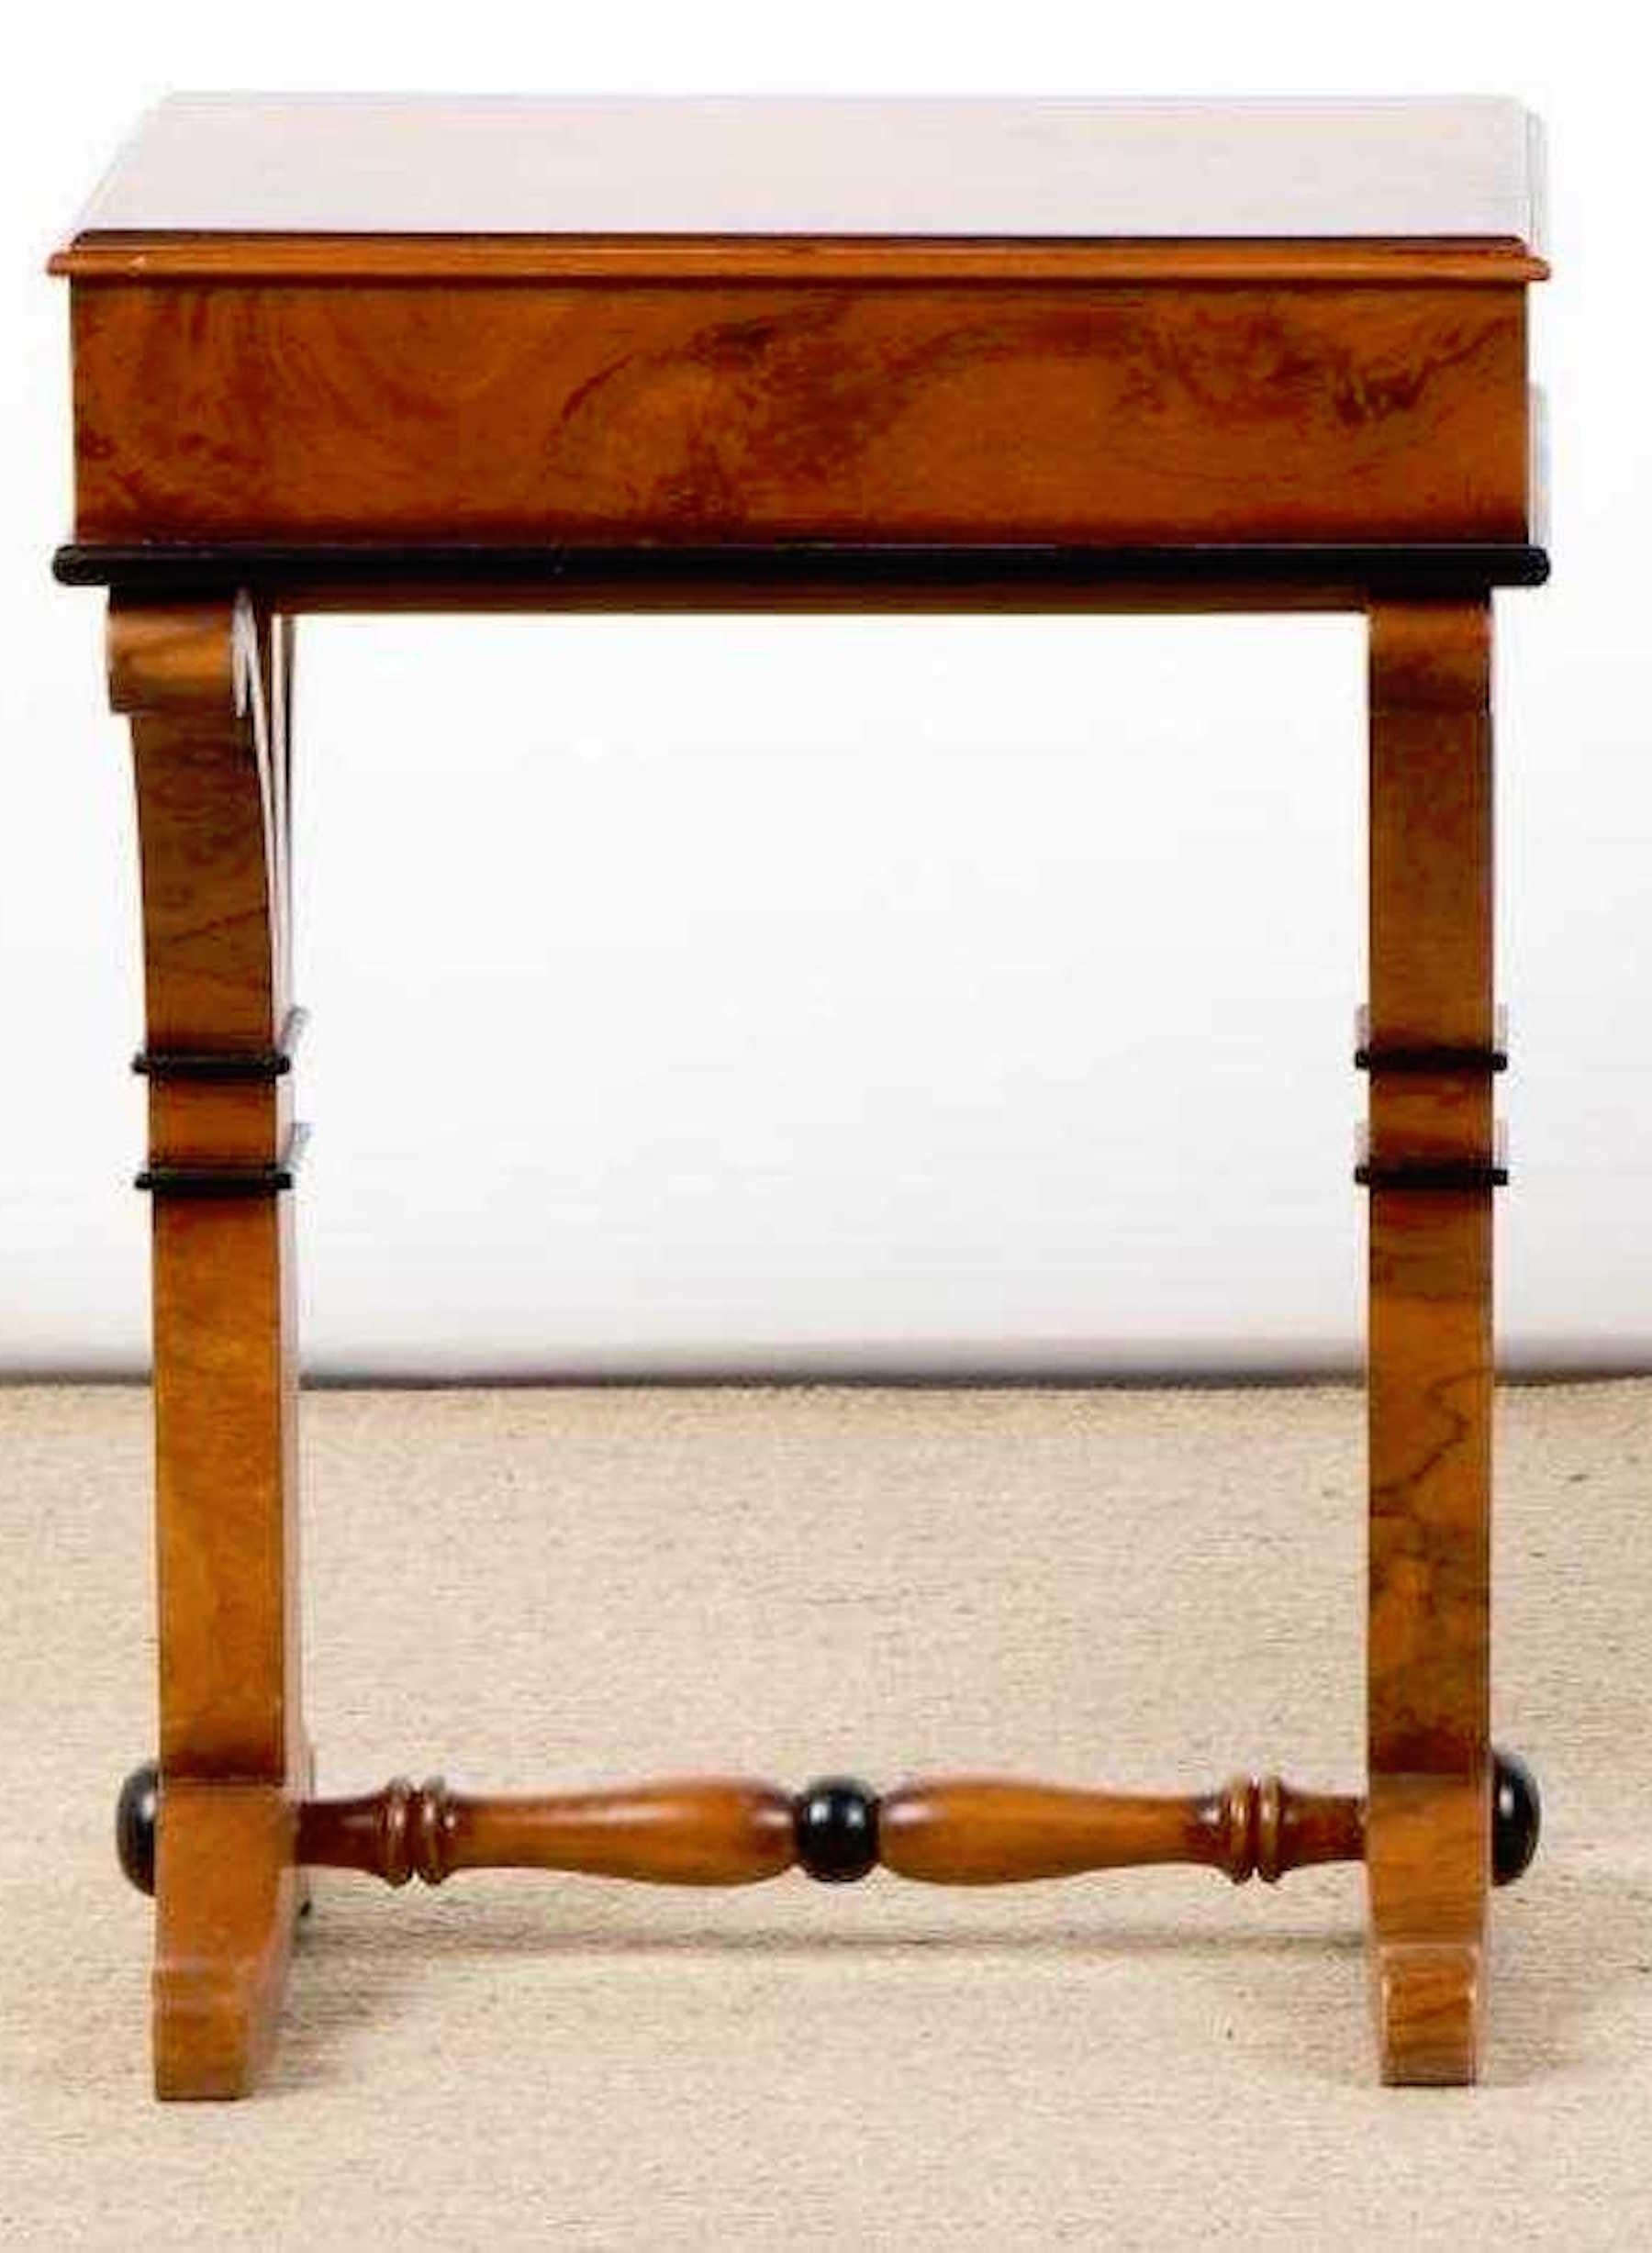 20th Century Pair of Biedermeier Style Burl and Ebonized End Tables or Nightstands